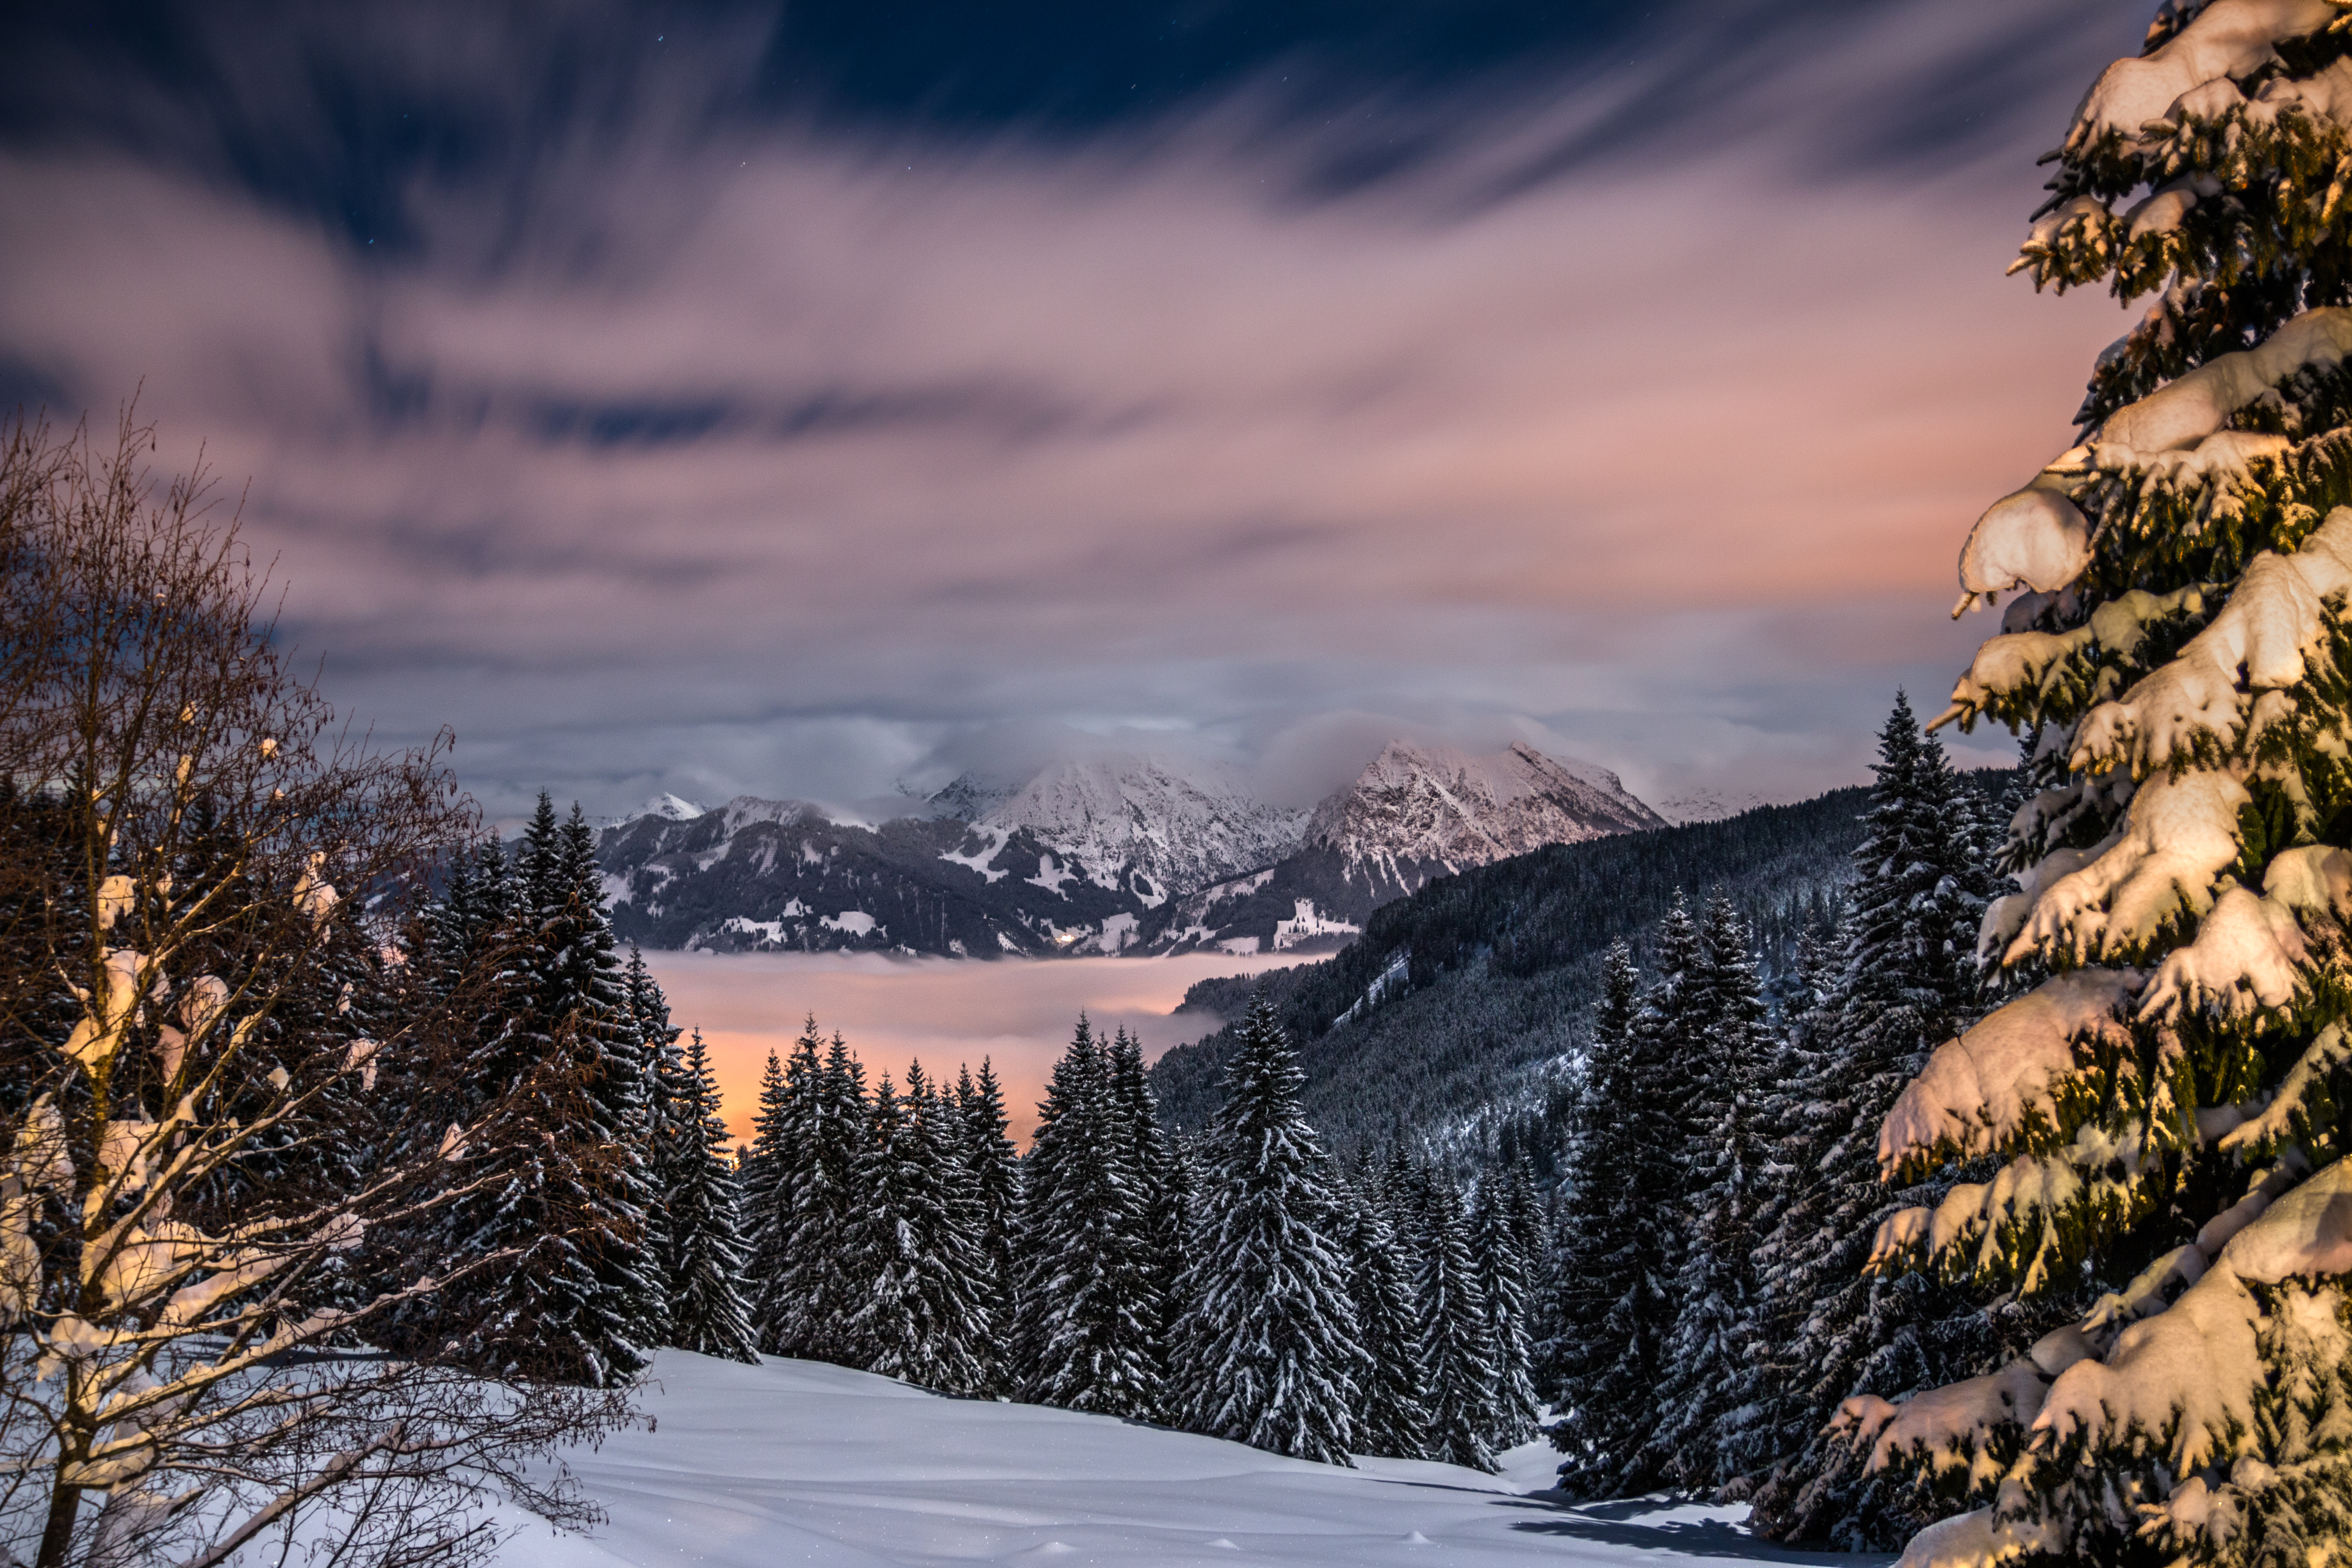 136330 download wallpaper mountains, snow, winter, nature, trees, germany, bavaria screensavers and pictures for free